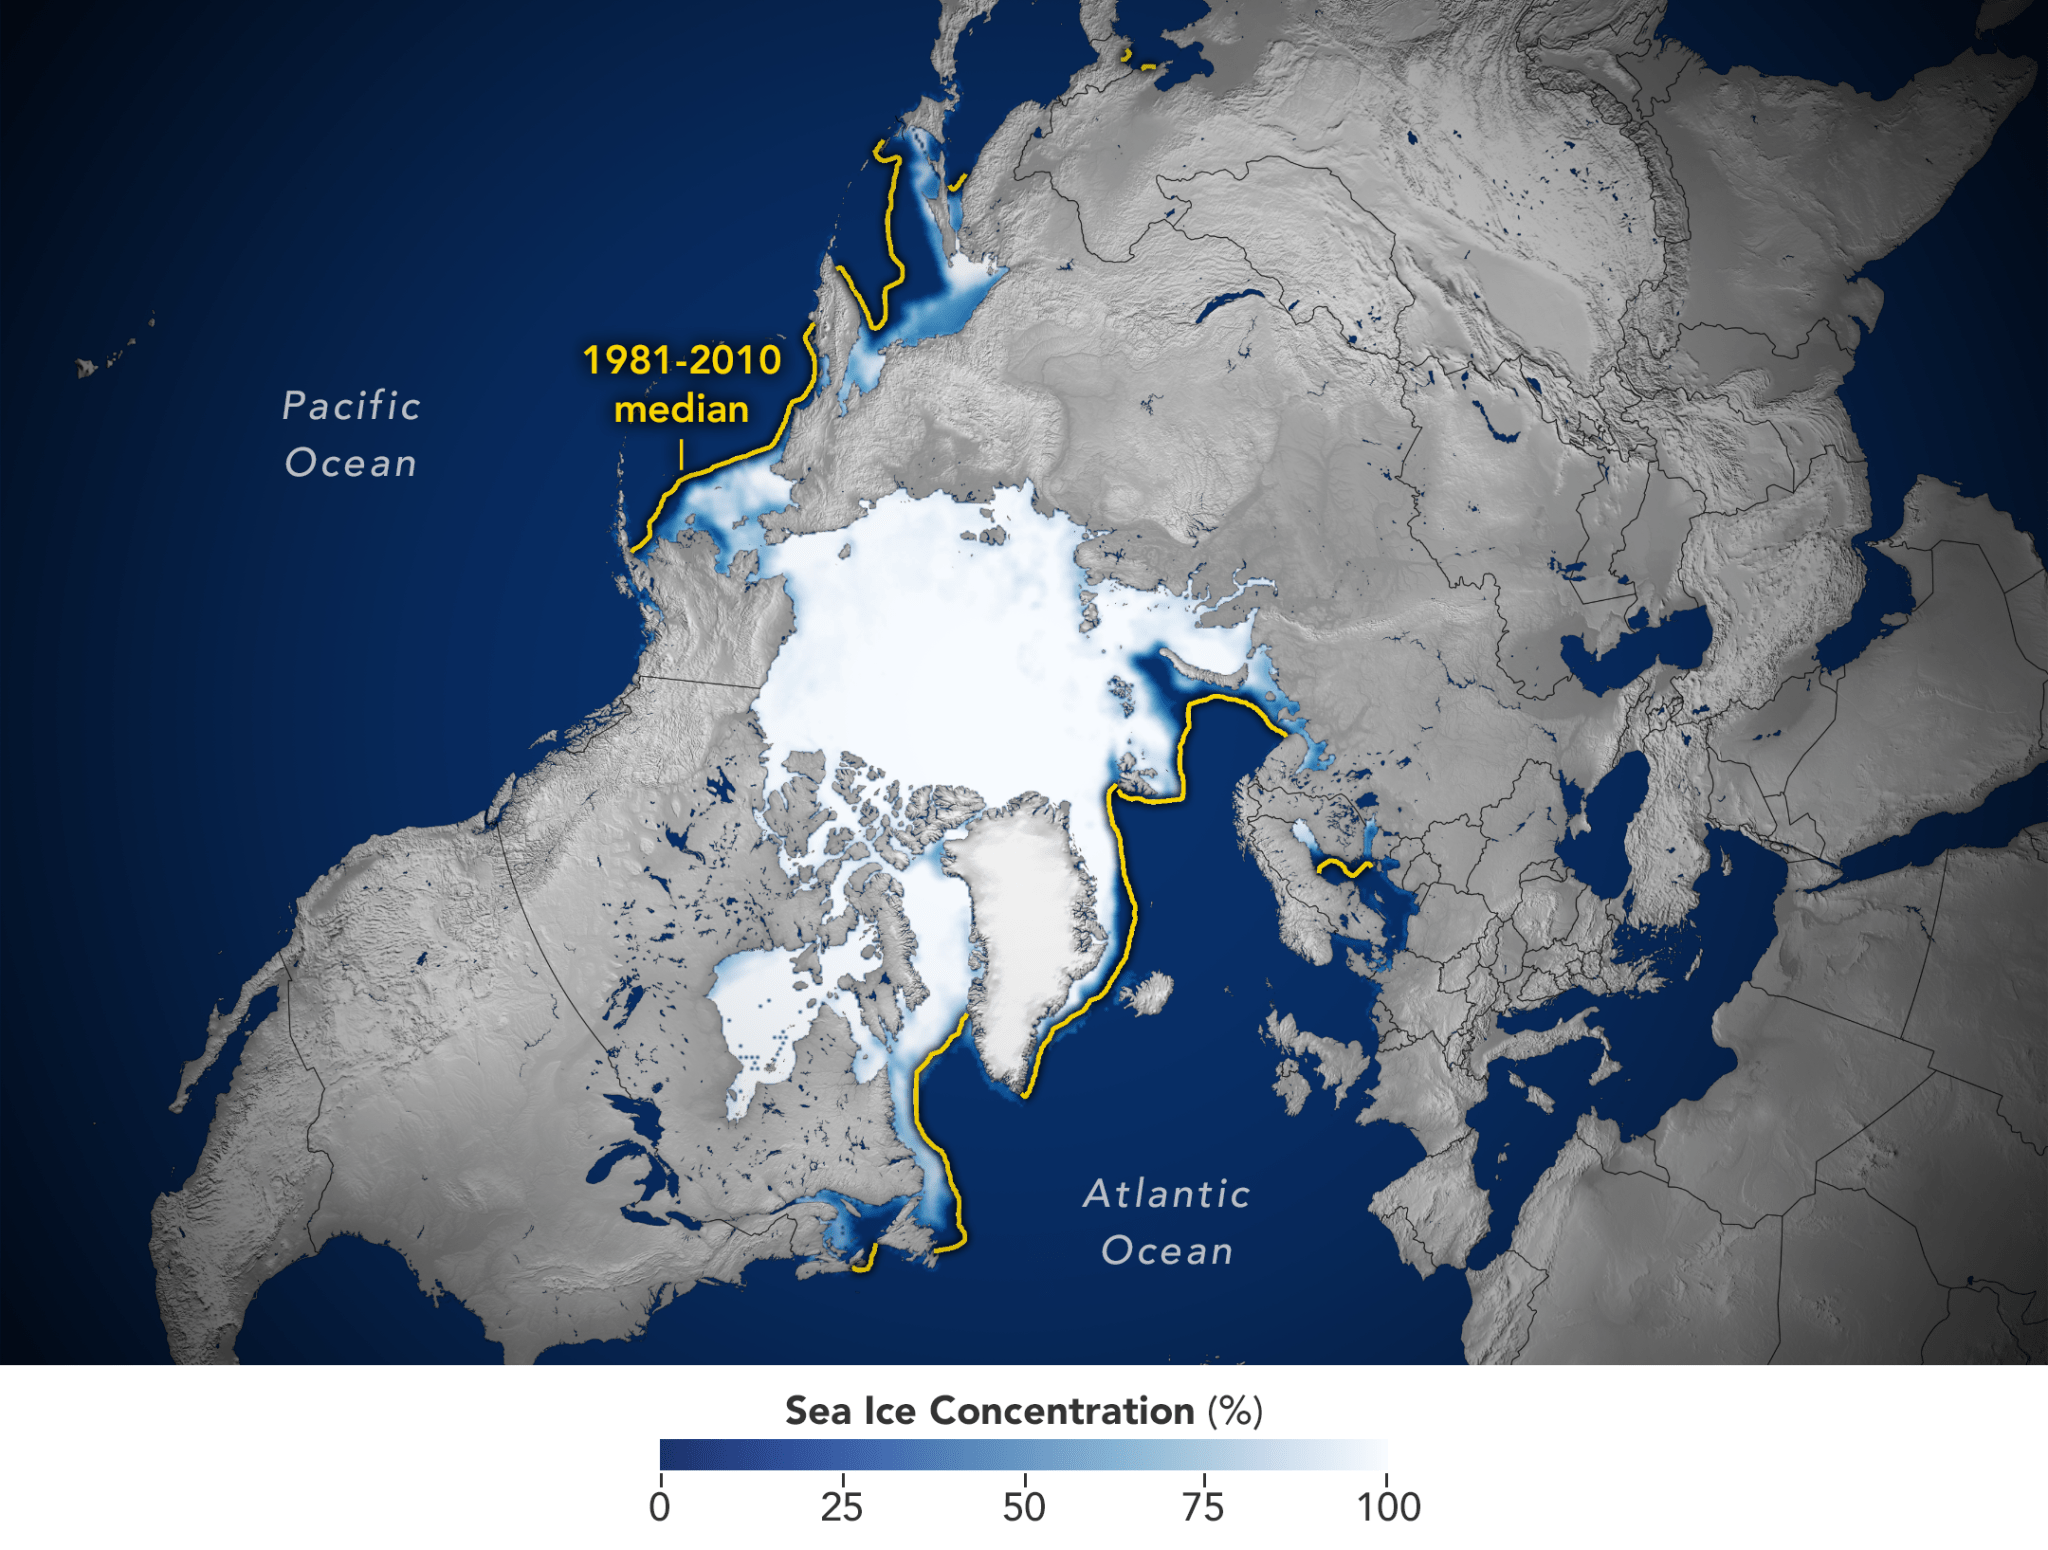 Visualization of Arctic sea ice extent March 2022. The ice reaches to the north coast of North American and Europe. A yellow line shows the average extent, reaching farther than the current extent.